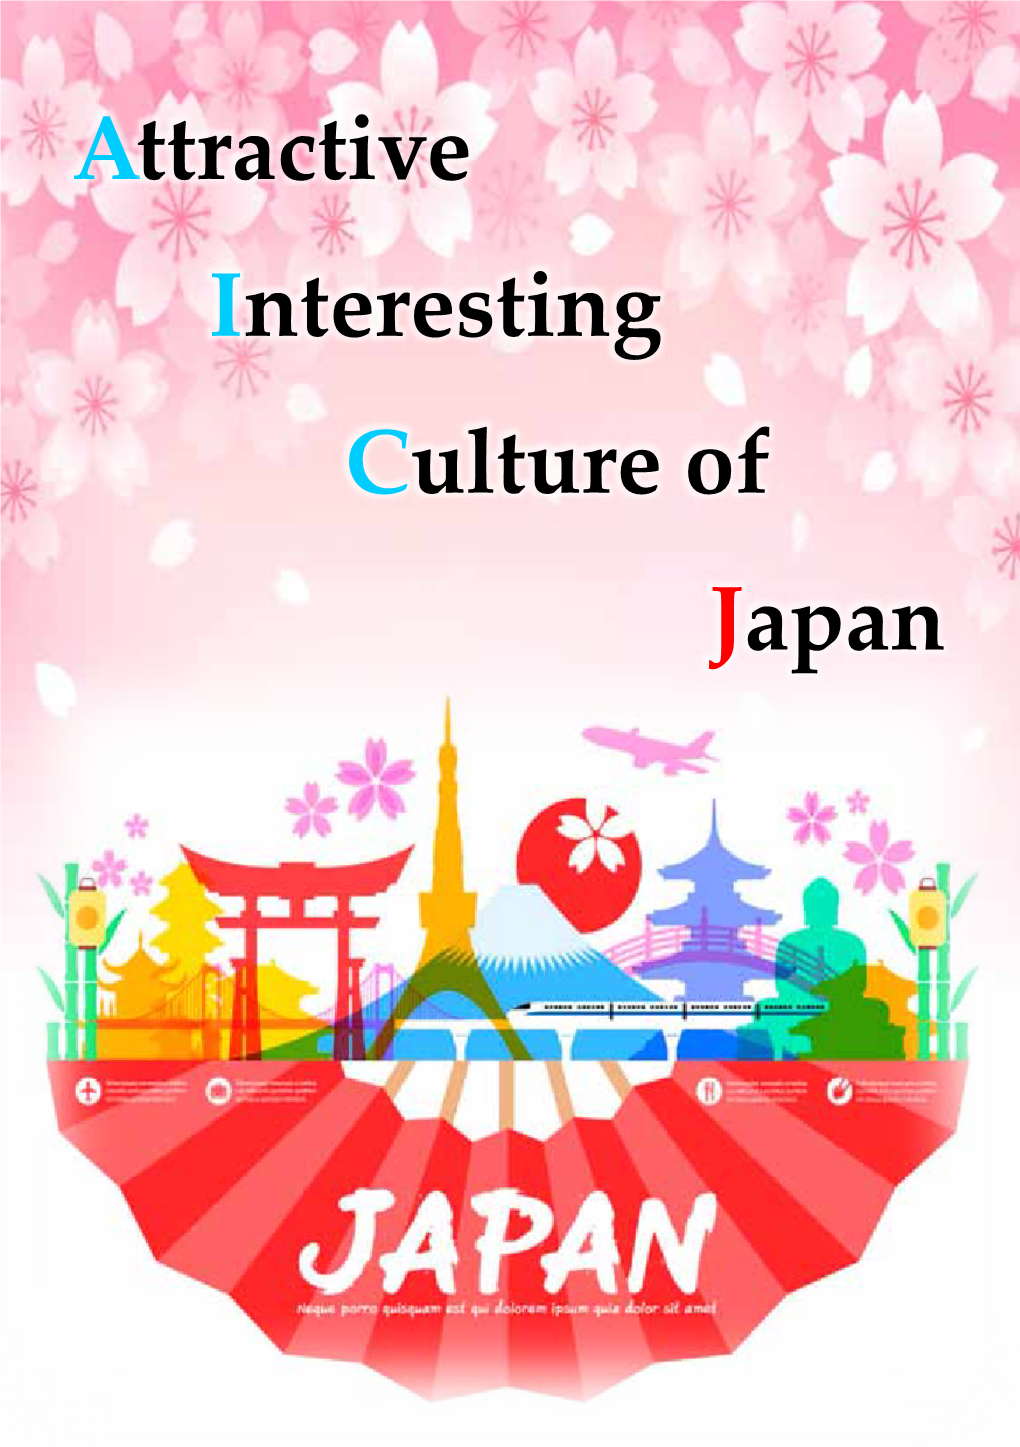 Attractive Interesting Culture of Japan